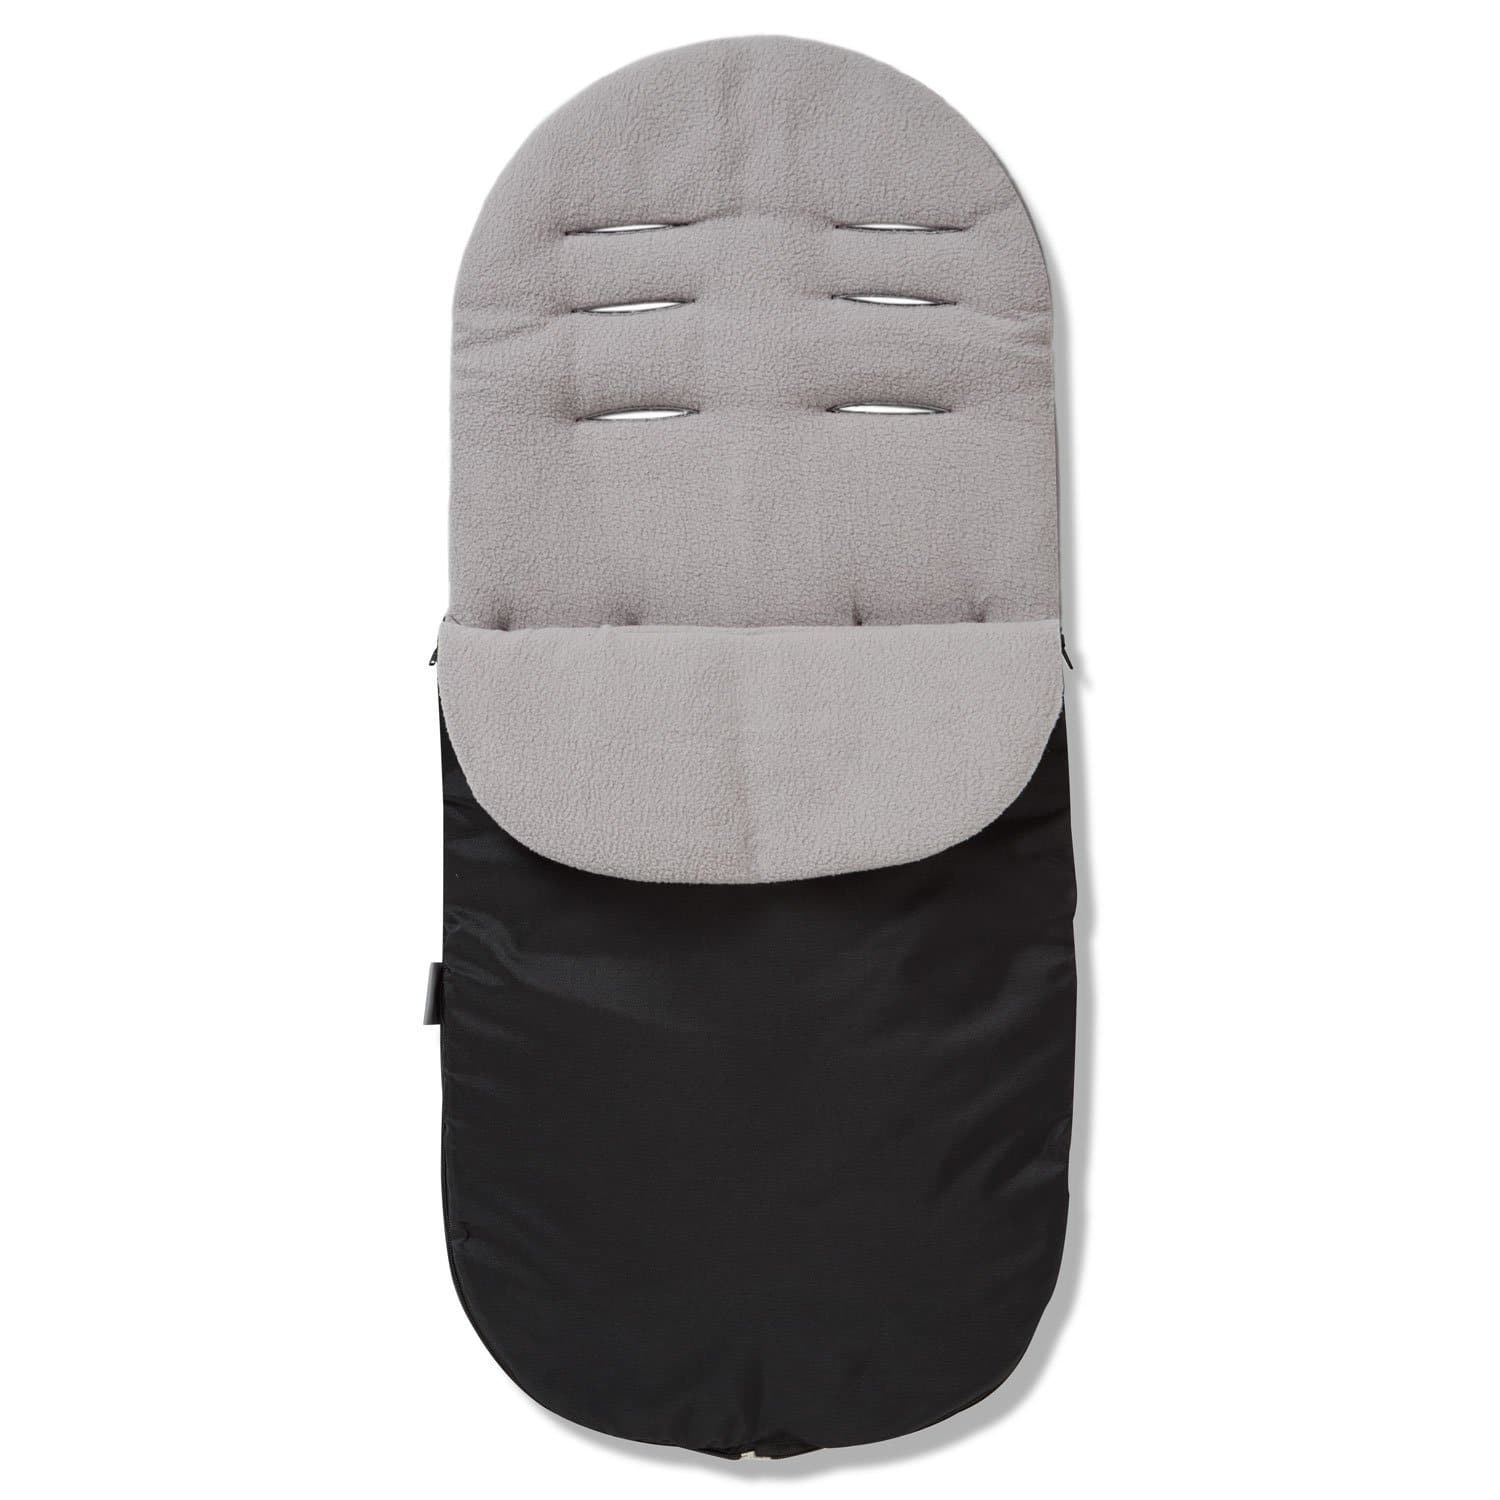 Footmuff / Cosy Toes Compatible with Cosatto - Grey / Fits All Models | For Your Little One